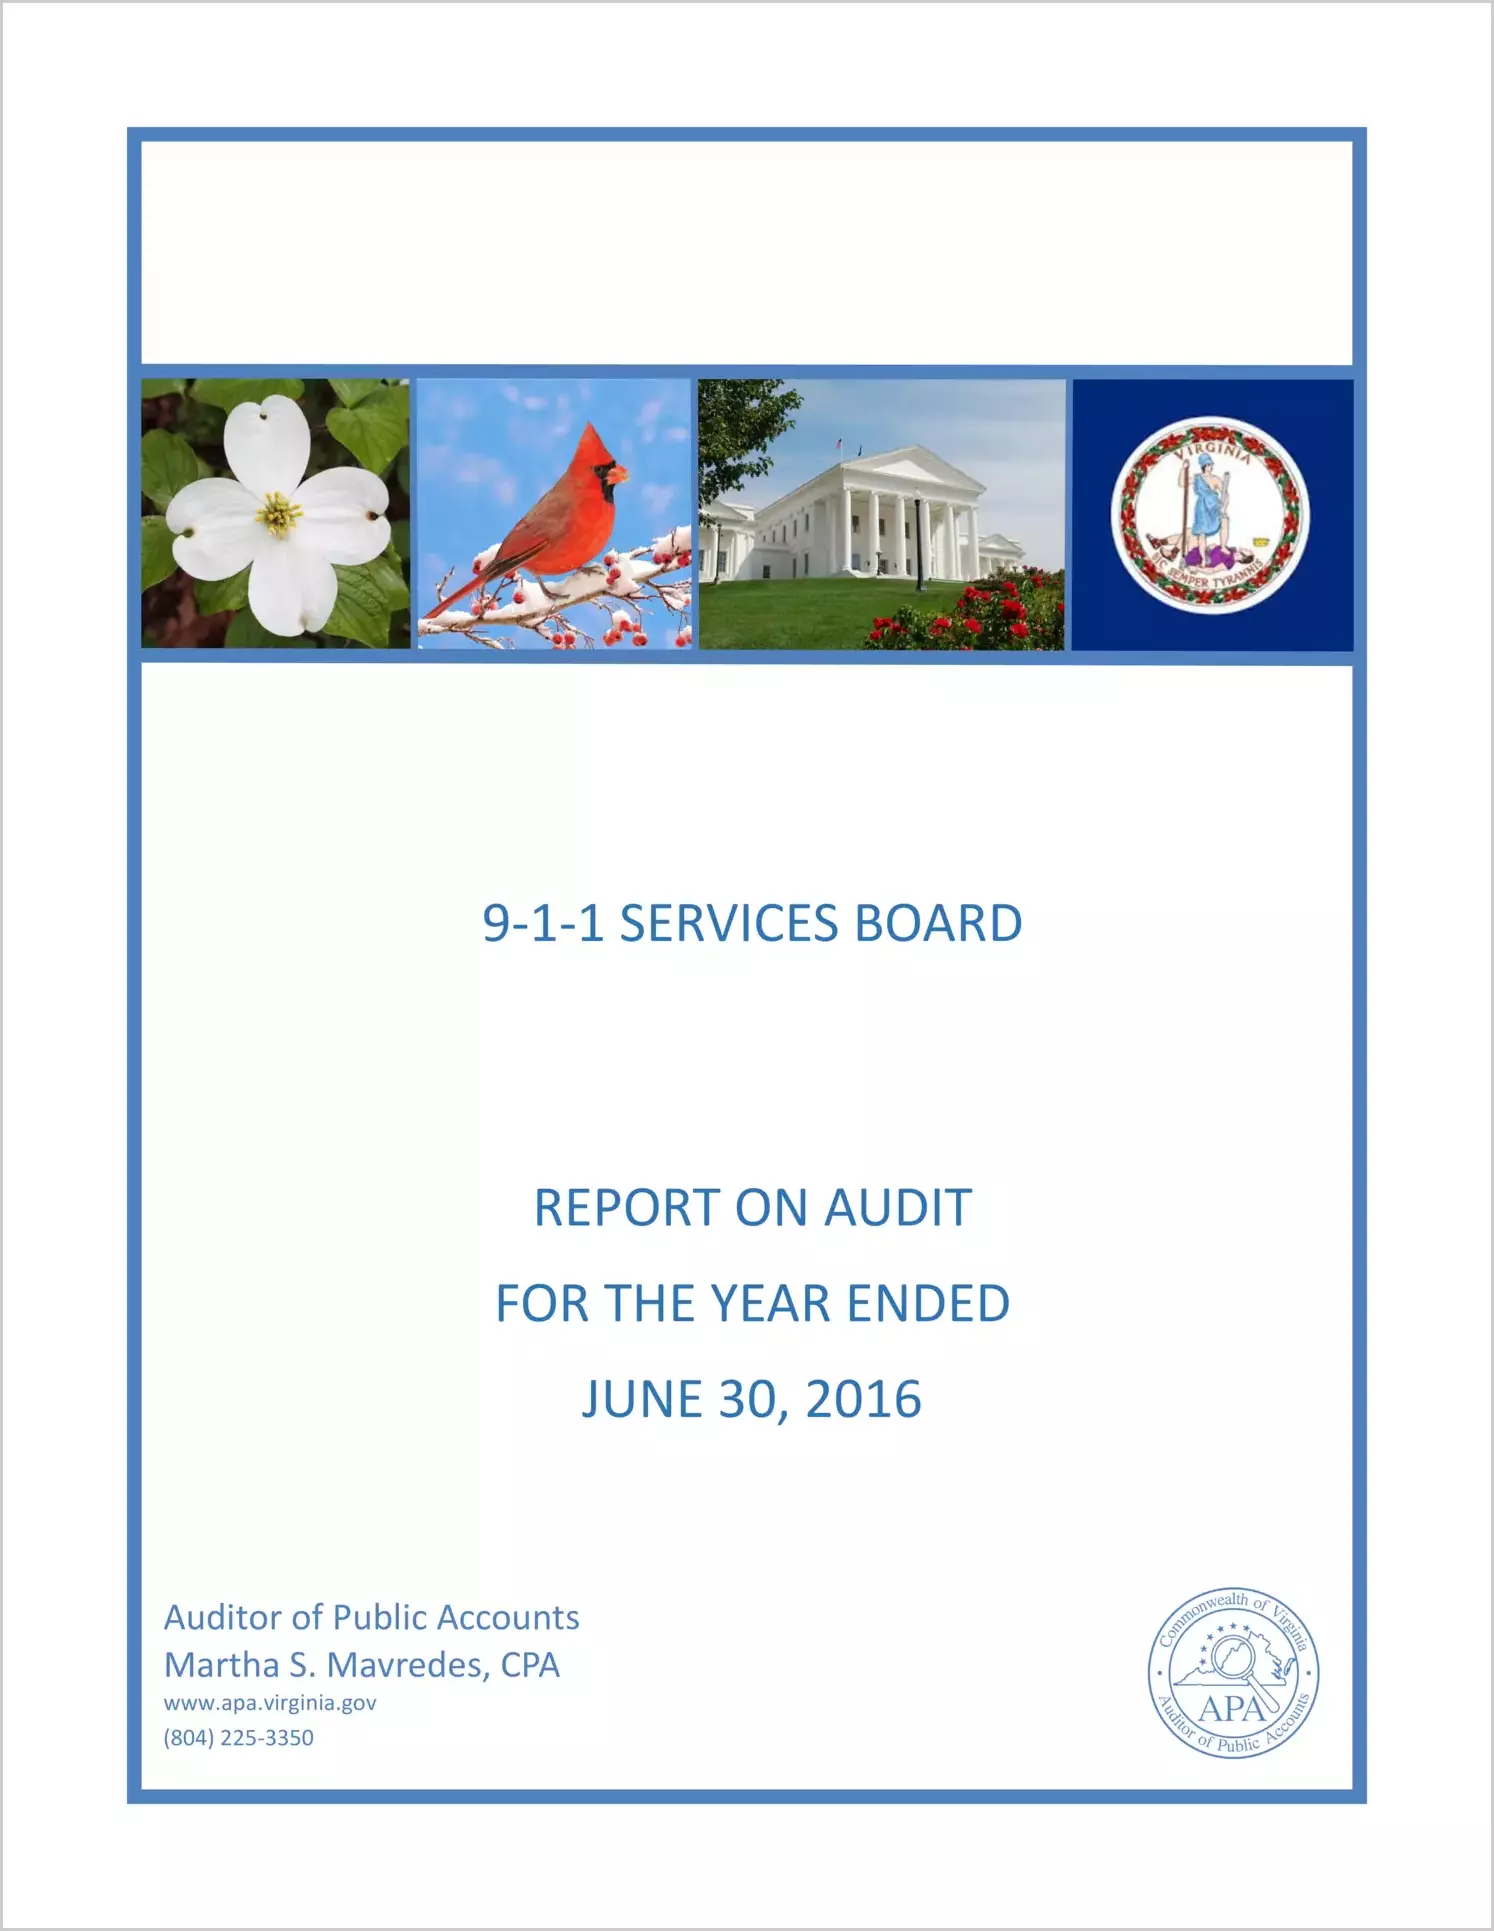 9-1-1 Services Board for the year ended June 30, 2016